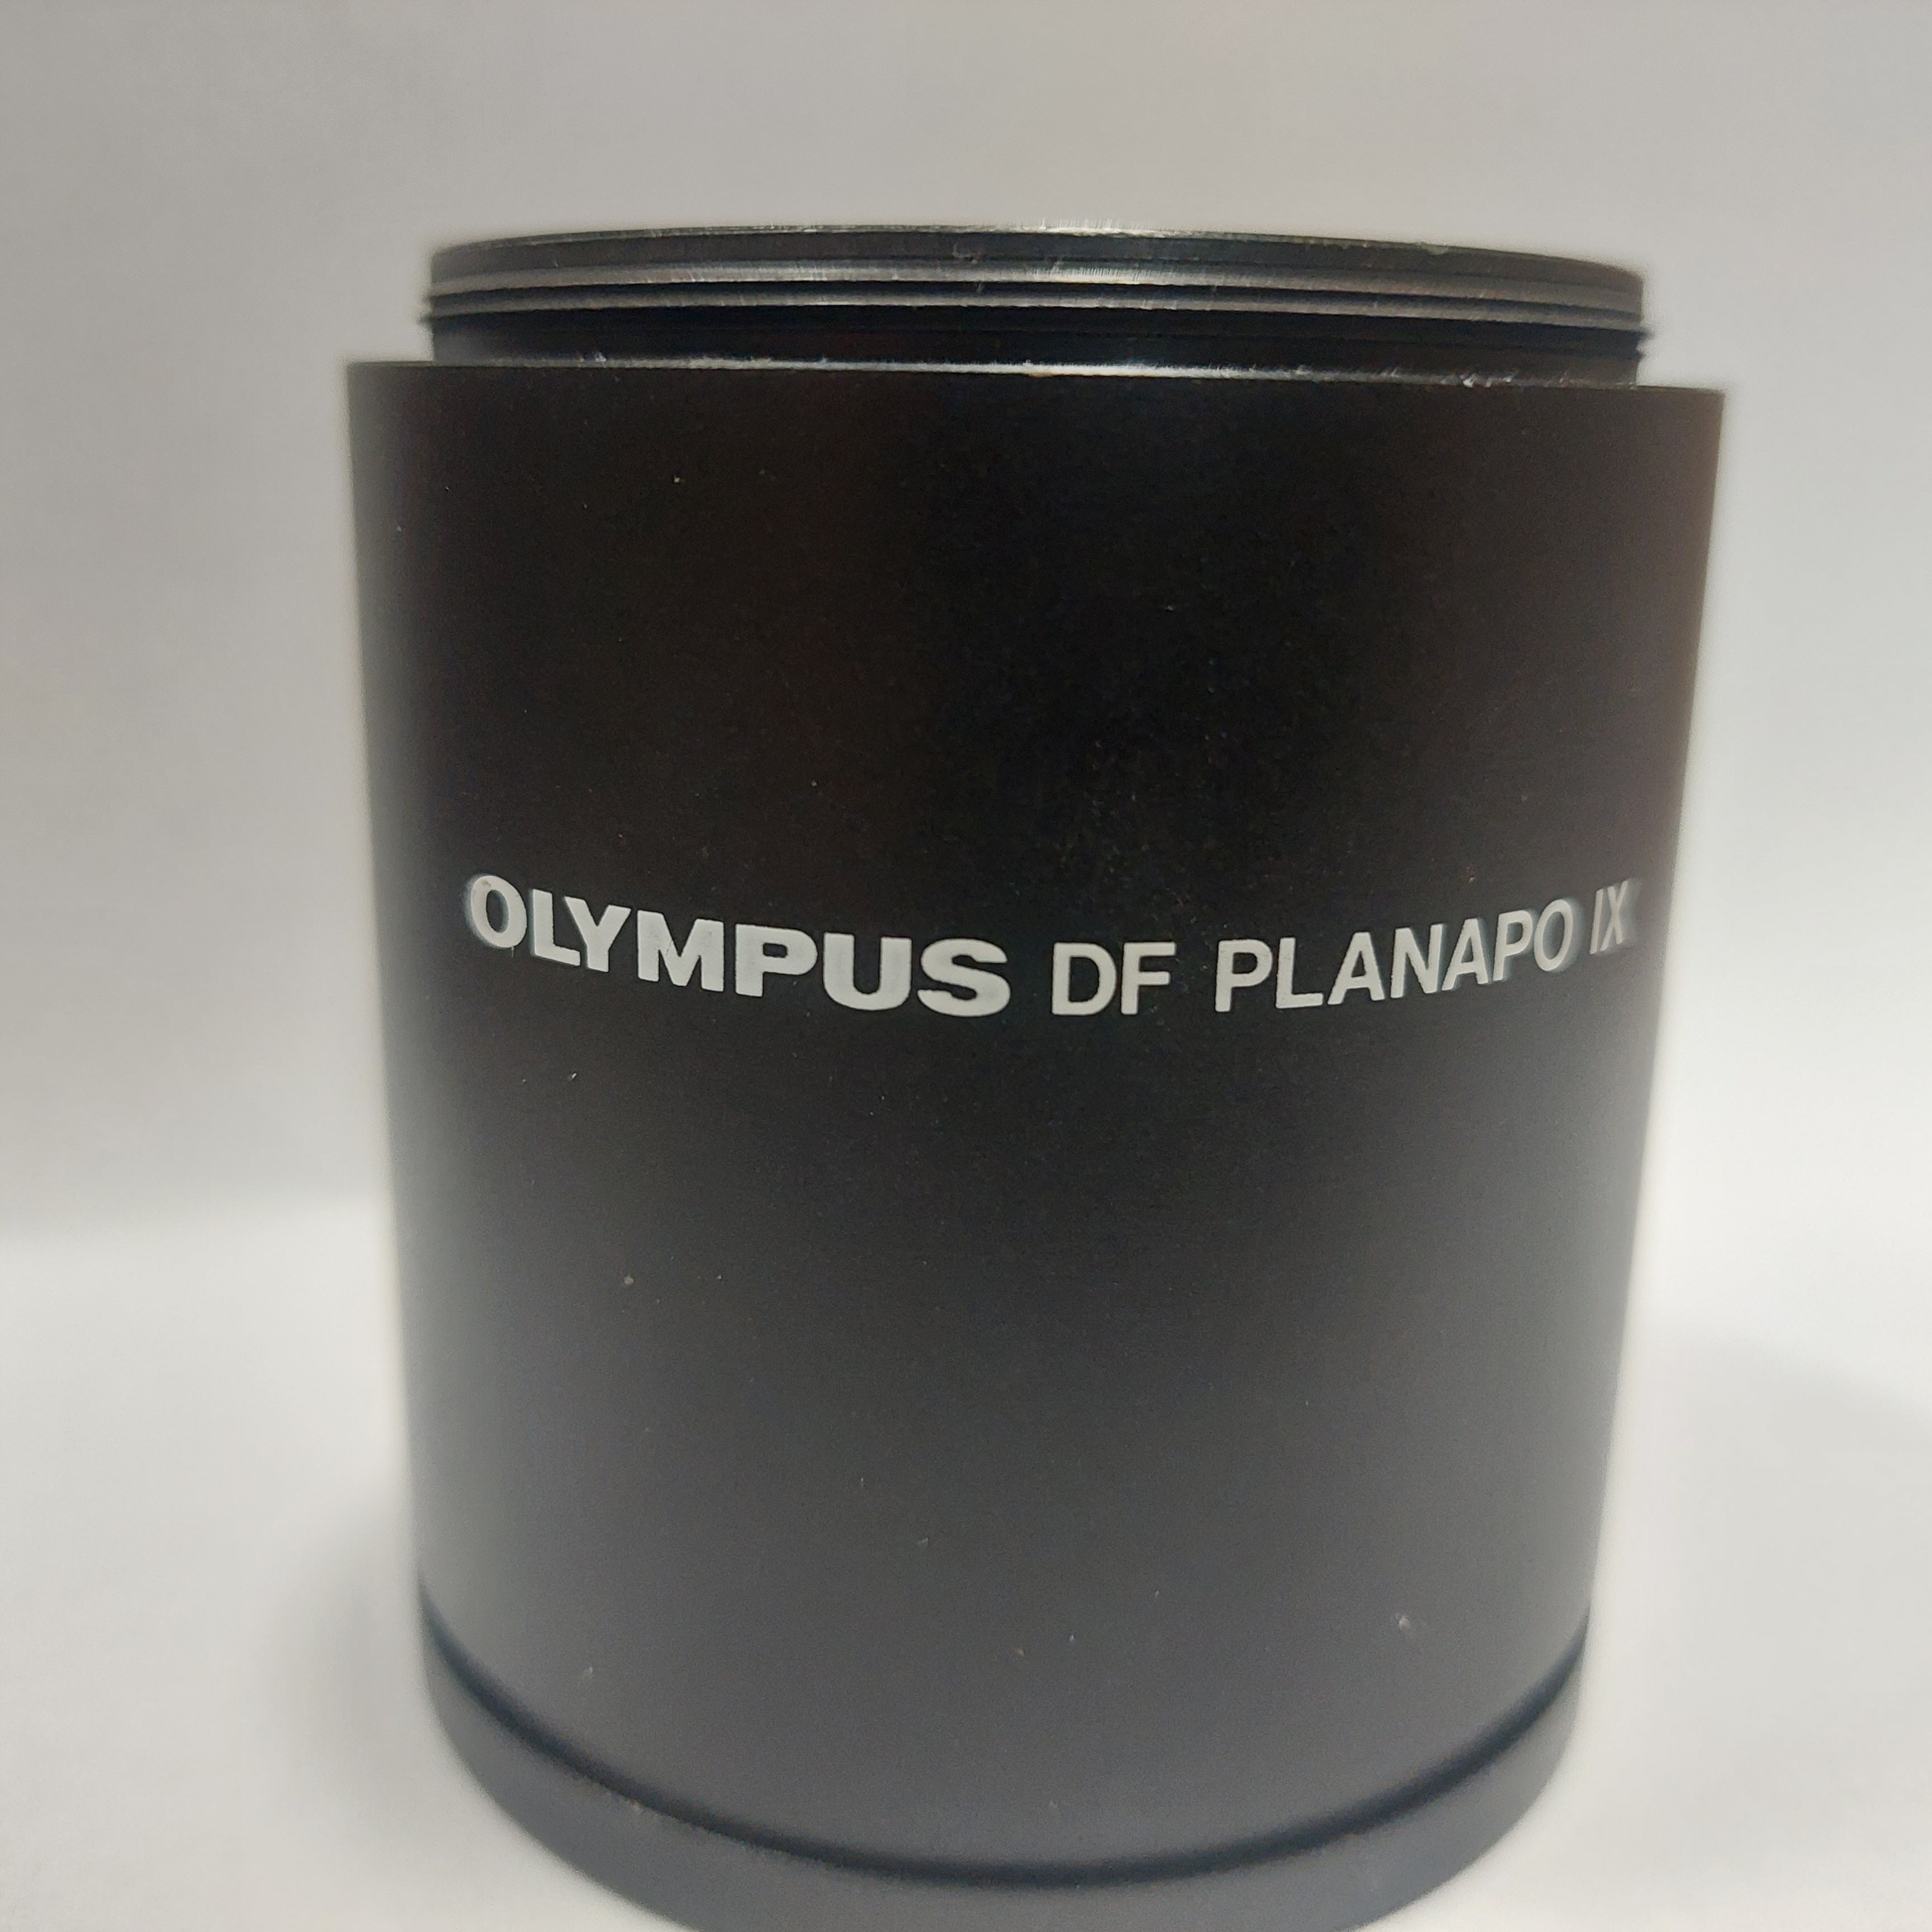 Olympus Stereo Microscope Objective DF PLANAPO 1X Used